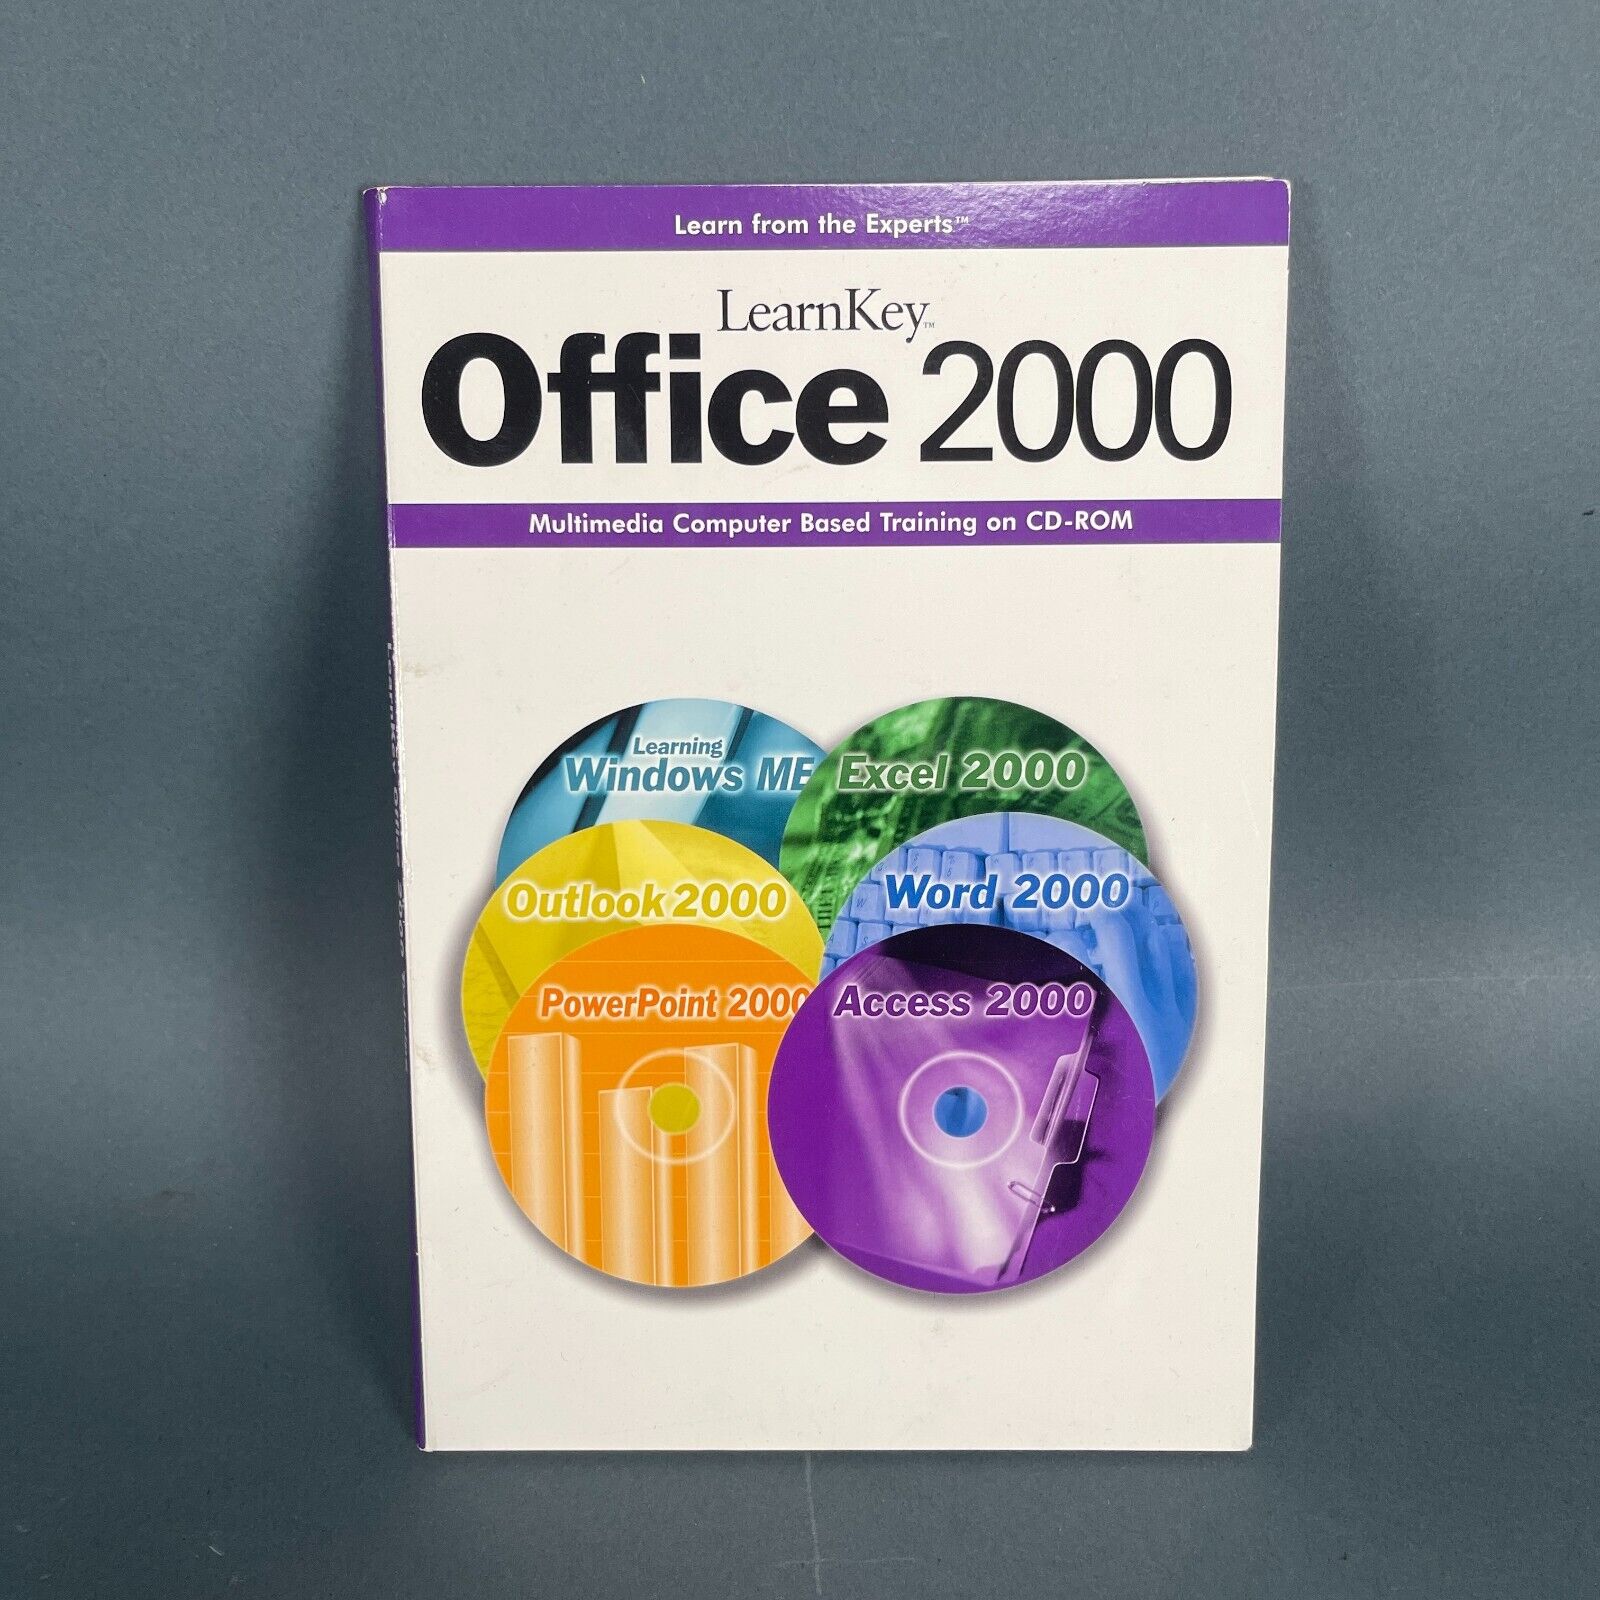 LearnKey Office 2000 Multimedia PC Computer Based Training 6 CD-Rom Set Excel